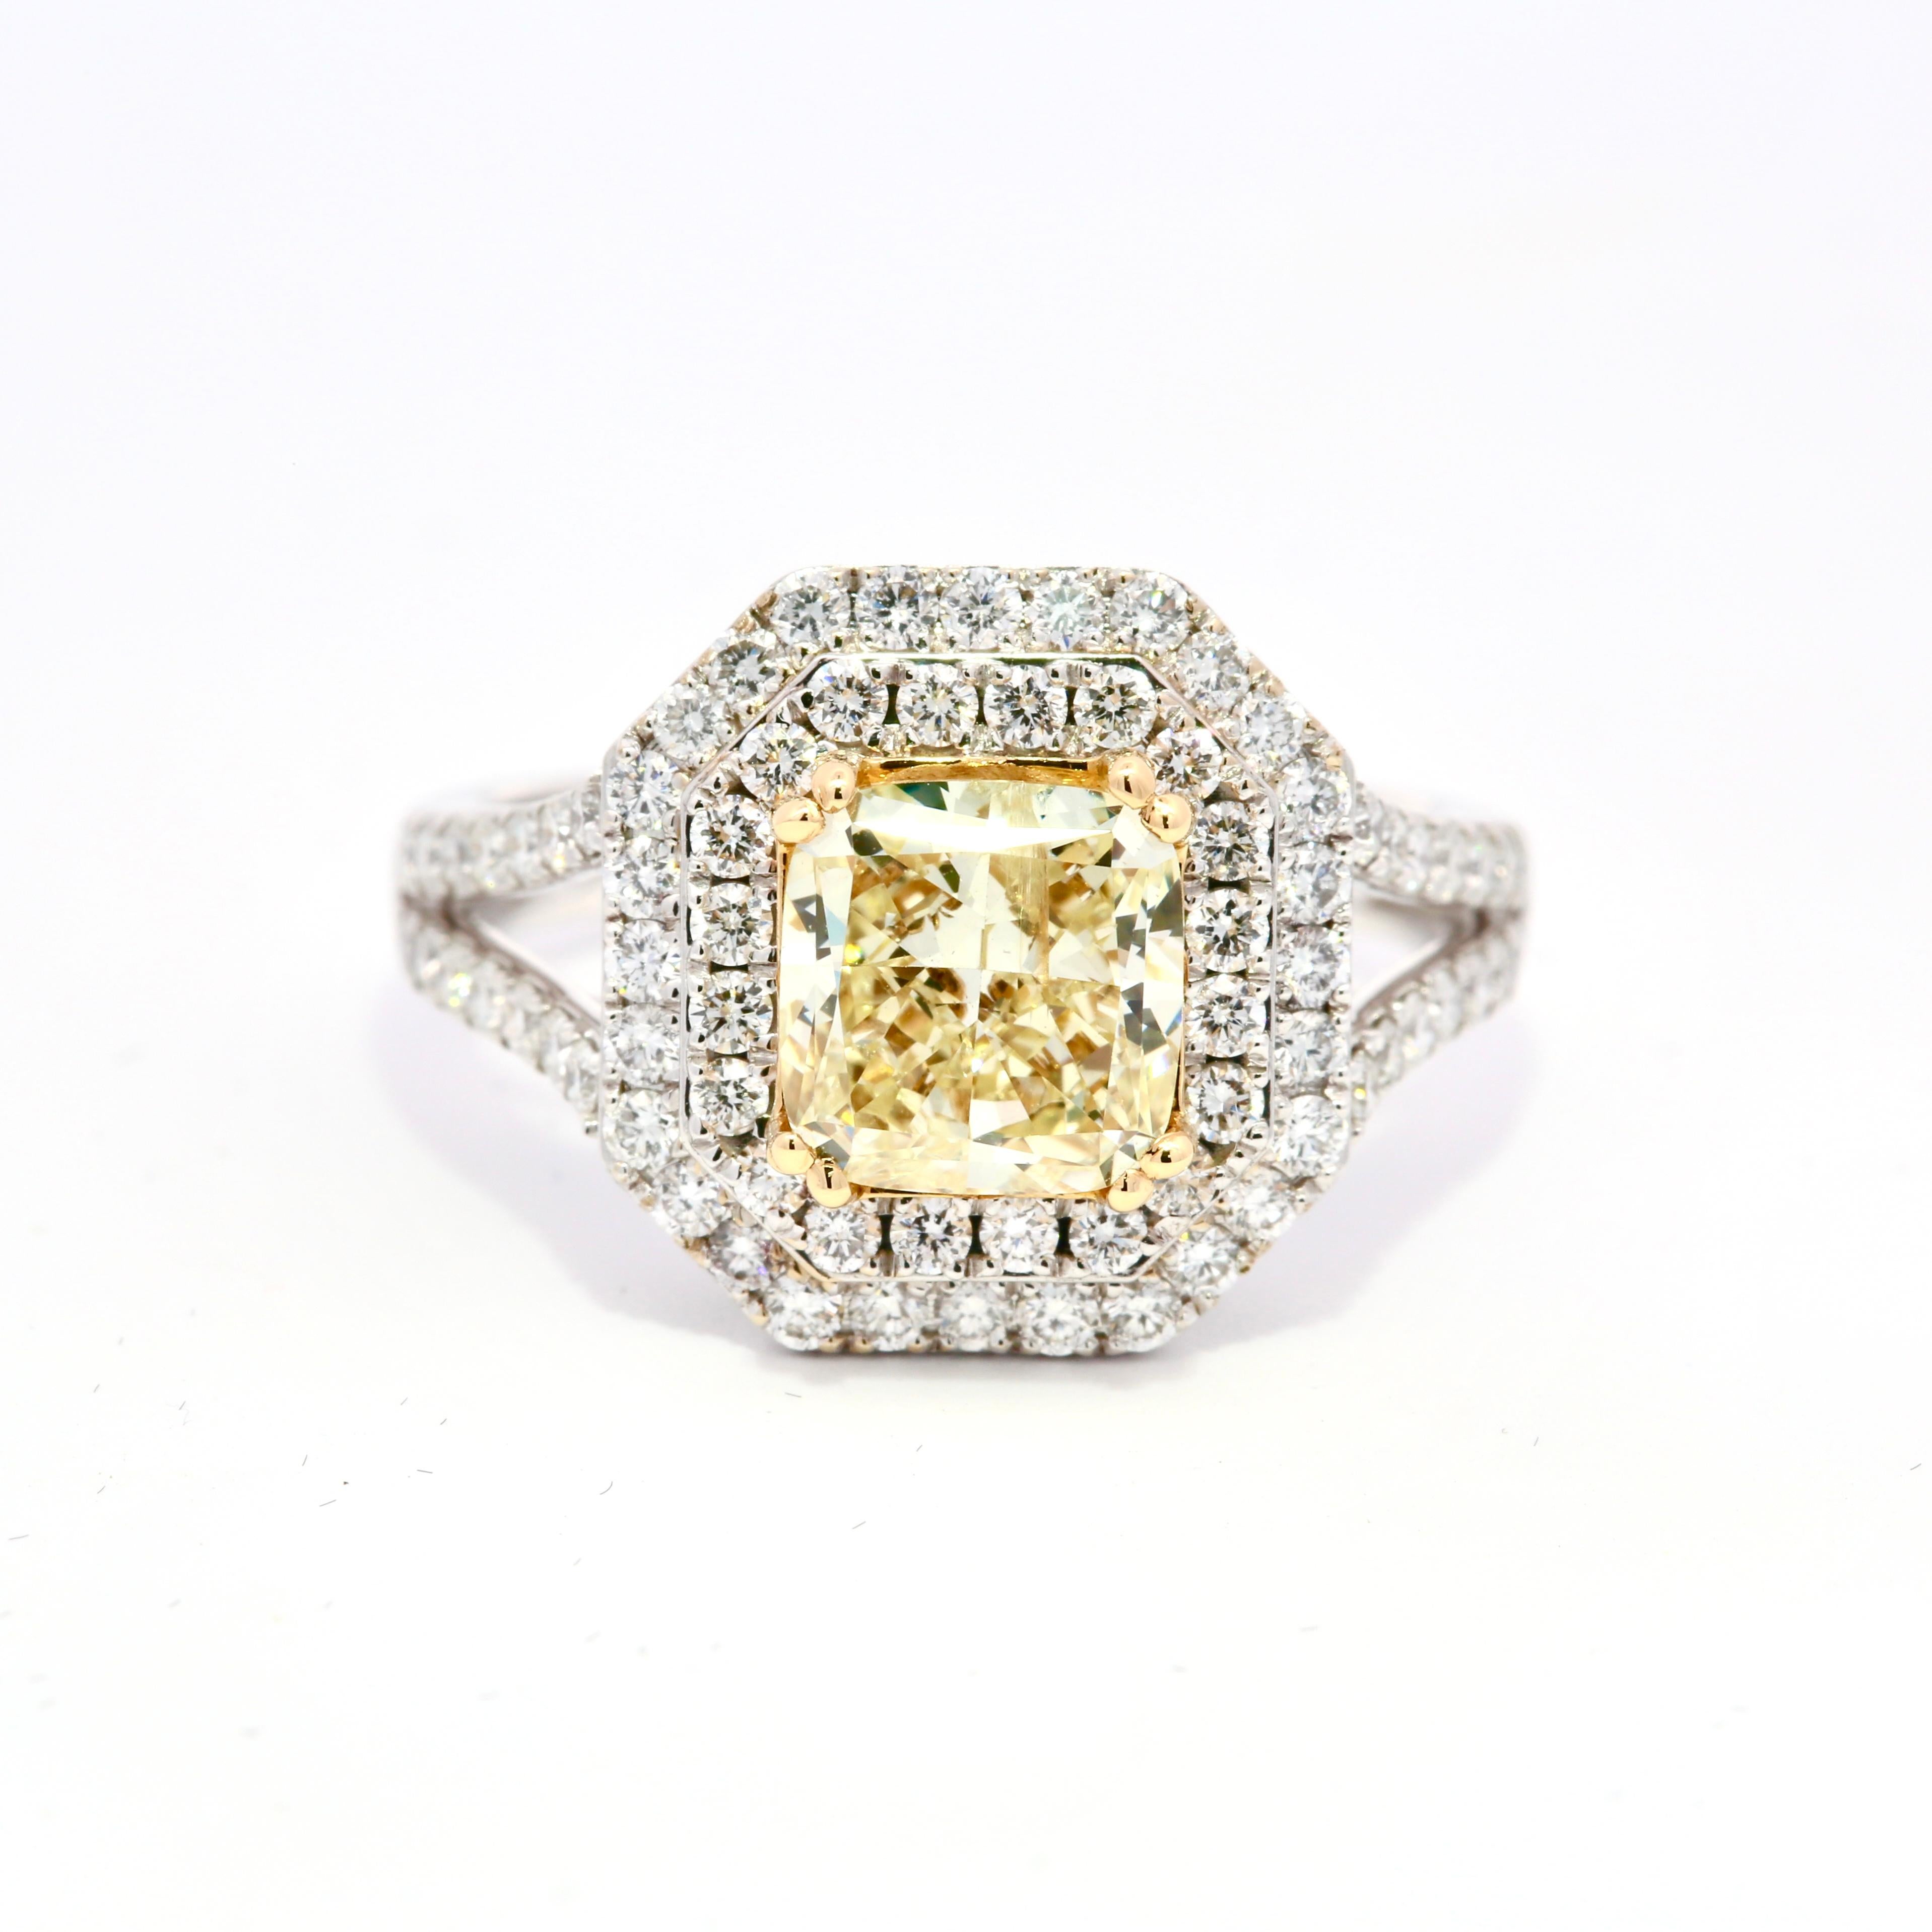 Introducing the epitome of luxury and elegance: our IGI Certified 2.13 Carats Fancy Yellow Diamond Ring. This exquisite piece of jewelry is a celebration of rare beauty and unparalleled craftsmanship, designed to captivate hearts and turn heads.